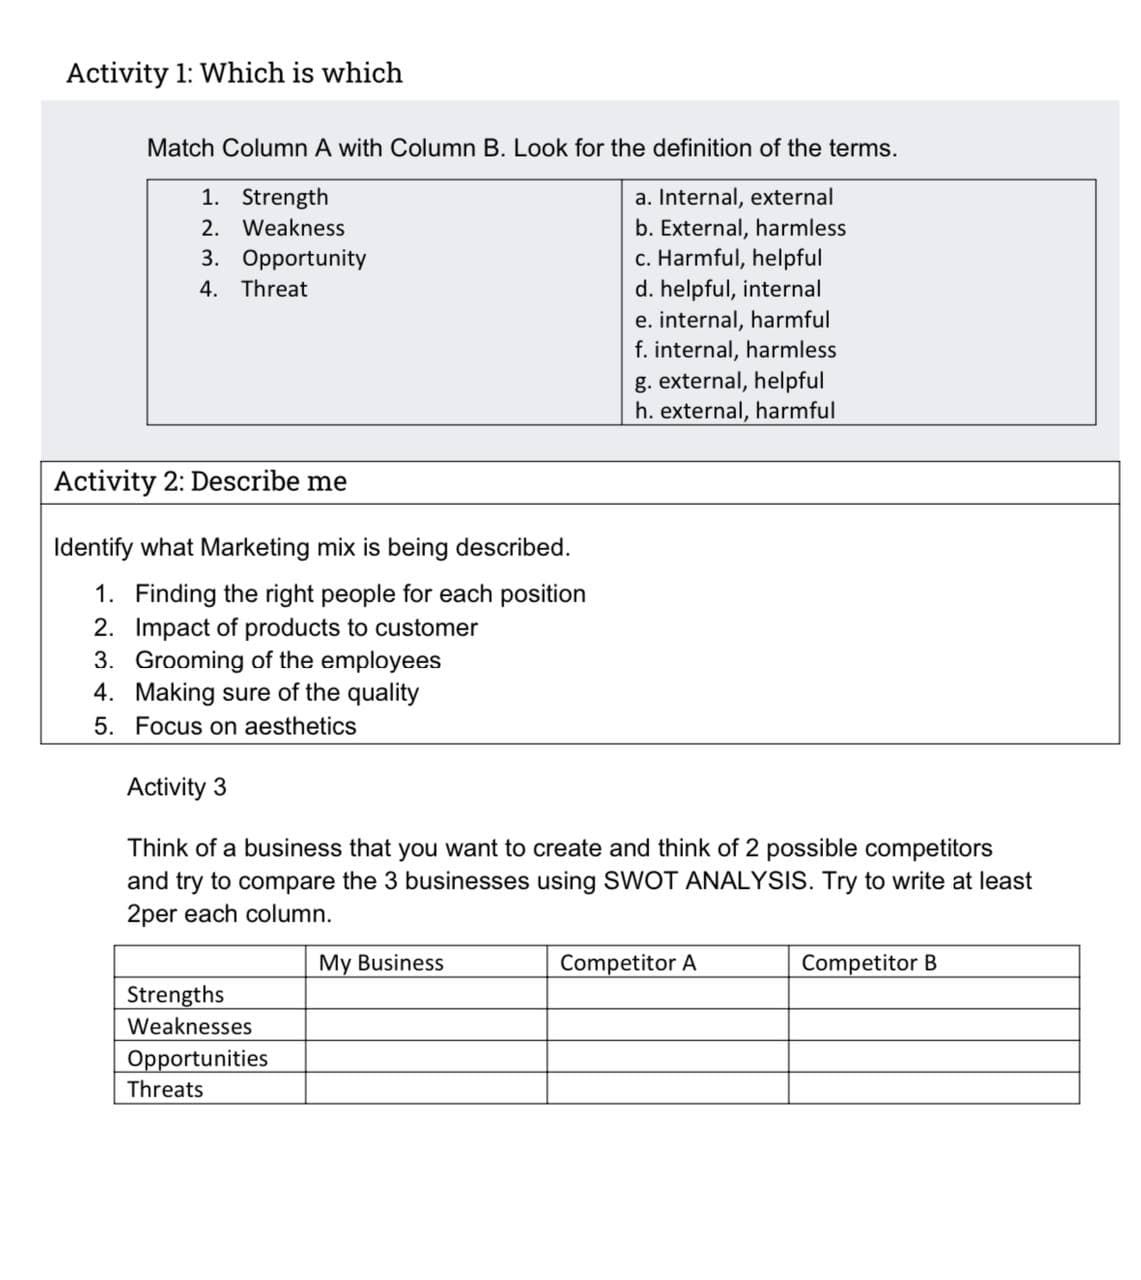 Activity 1: Which is which
Match Column A with Column B. Look for the definition of the terms.
a. Internal, external
b. External, harmless
c. Harmful, helpful
d. helpful, internal
e. internal, harmful
f. internal, harmless
1. Strength
2. Weakness
3. Opportunity
4. Threat
Activity 2: Describe me
Identify what Marketing mix is being described.
1. Finding the right people for each position
2. Impact of products to customer
3. Grooming of the employees
4.
Making sure of the quality
5. Focus on aesthetics
Activity 3
Think of a business that you want to create and think of 2 possible competitors
and try to compare the 3 businesses using SWOT ANALYSIS. Try to write at least
2per each column.
Strengths
Weaknesses
Opportunities
Threats
g. external, helpful
h. external, harmful
My Business
Competitor A
Competitor B